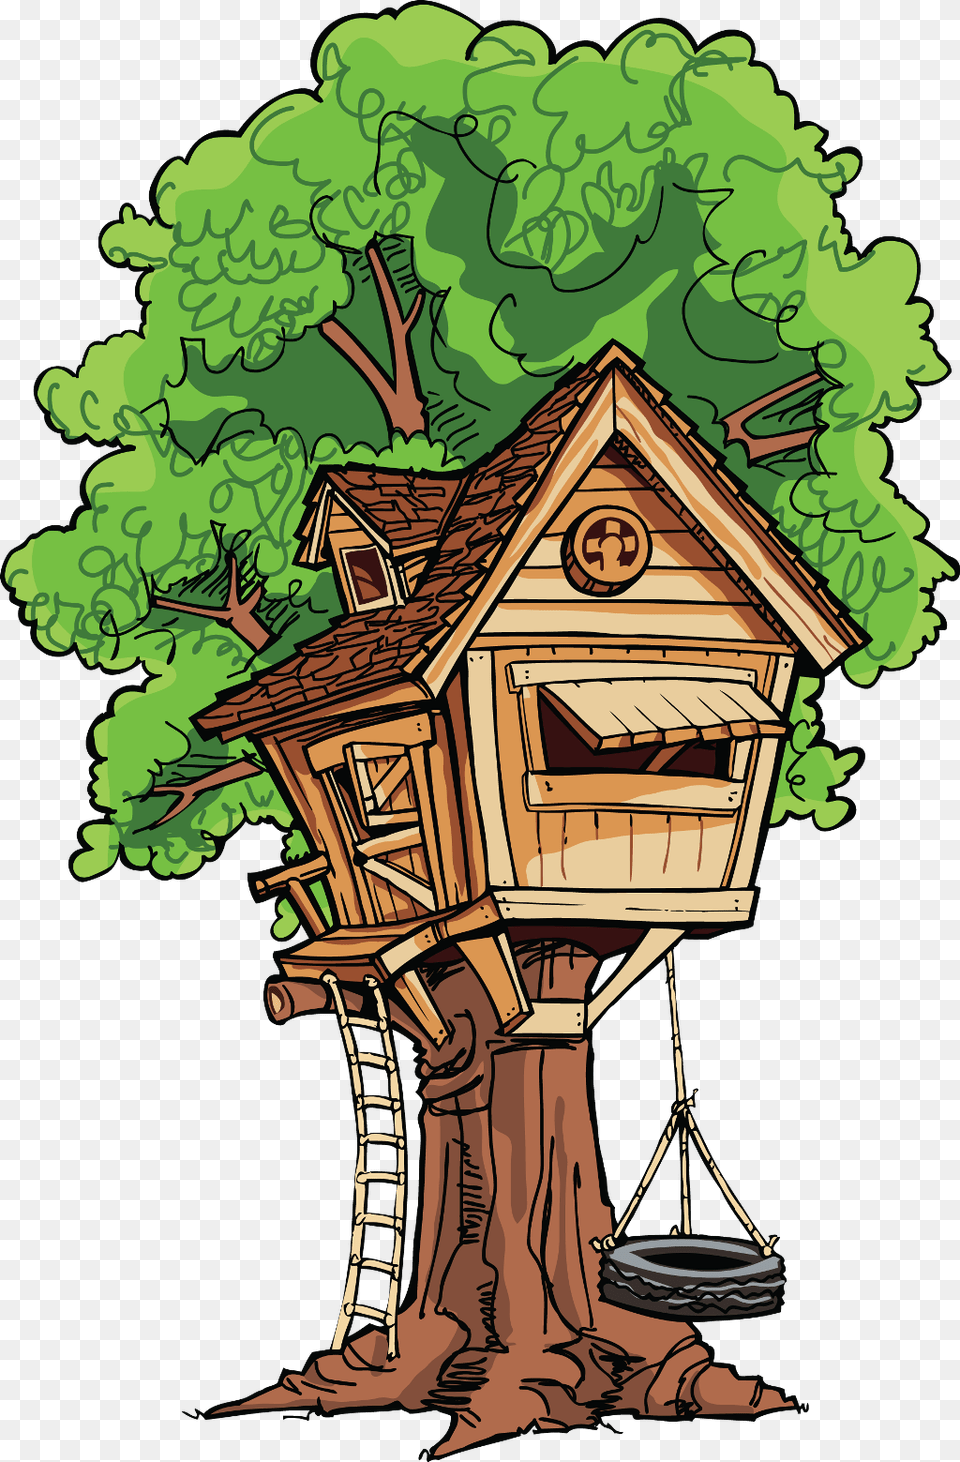 Treehouse Tree Tireswing Yard Playground Terrieasterly Magic Tree House Tree House, Architecture, Building, Cabin, Housing Free Png Download